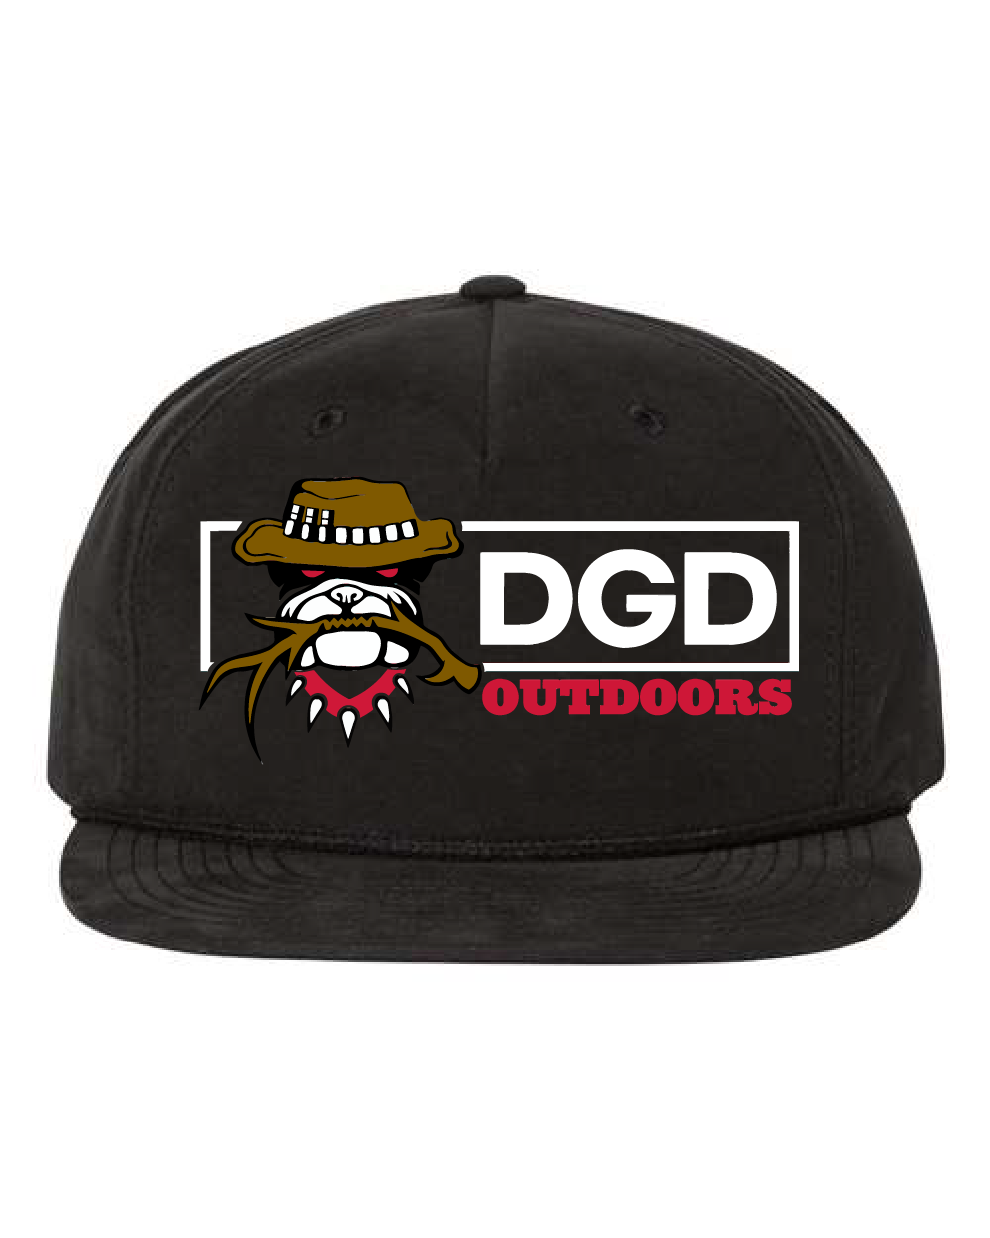 Classic DGD black rope hat